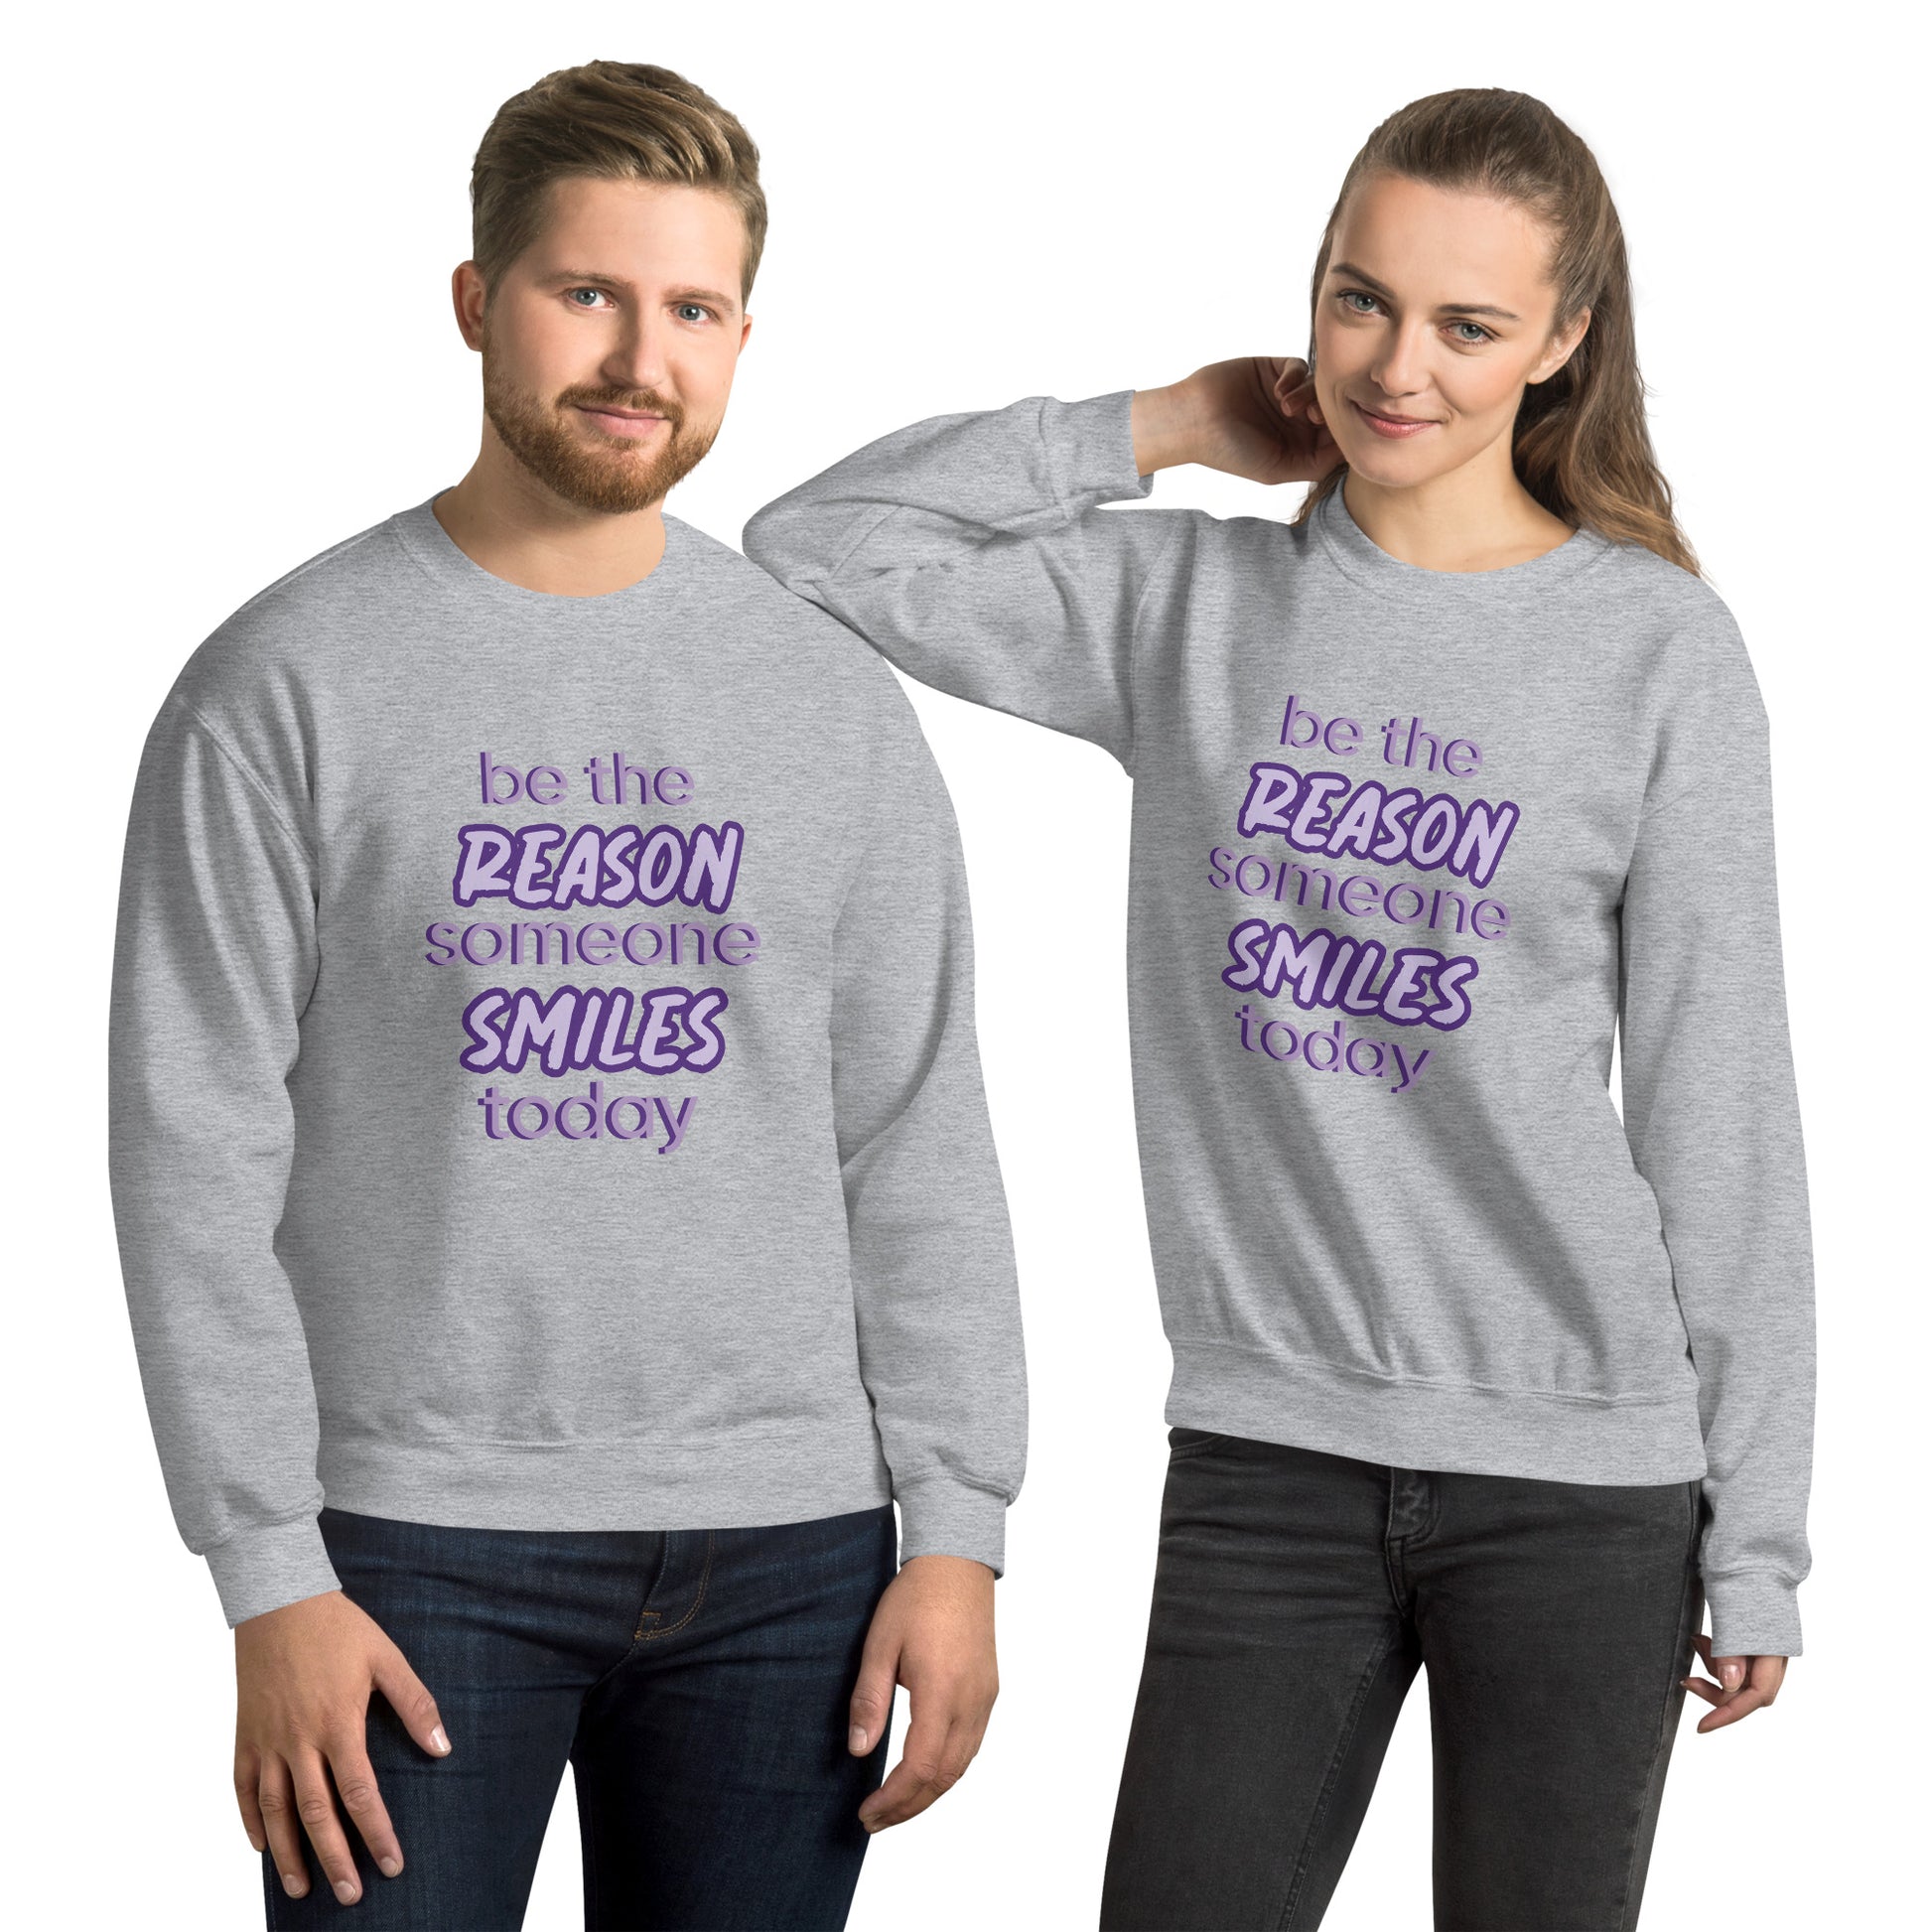 Men and women with sport grey sweater and the quote "be the reason someone smiles today" in purple on it. 